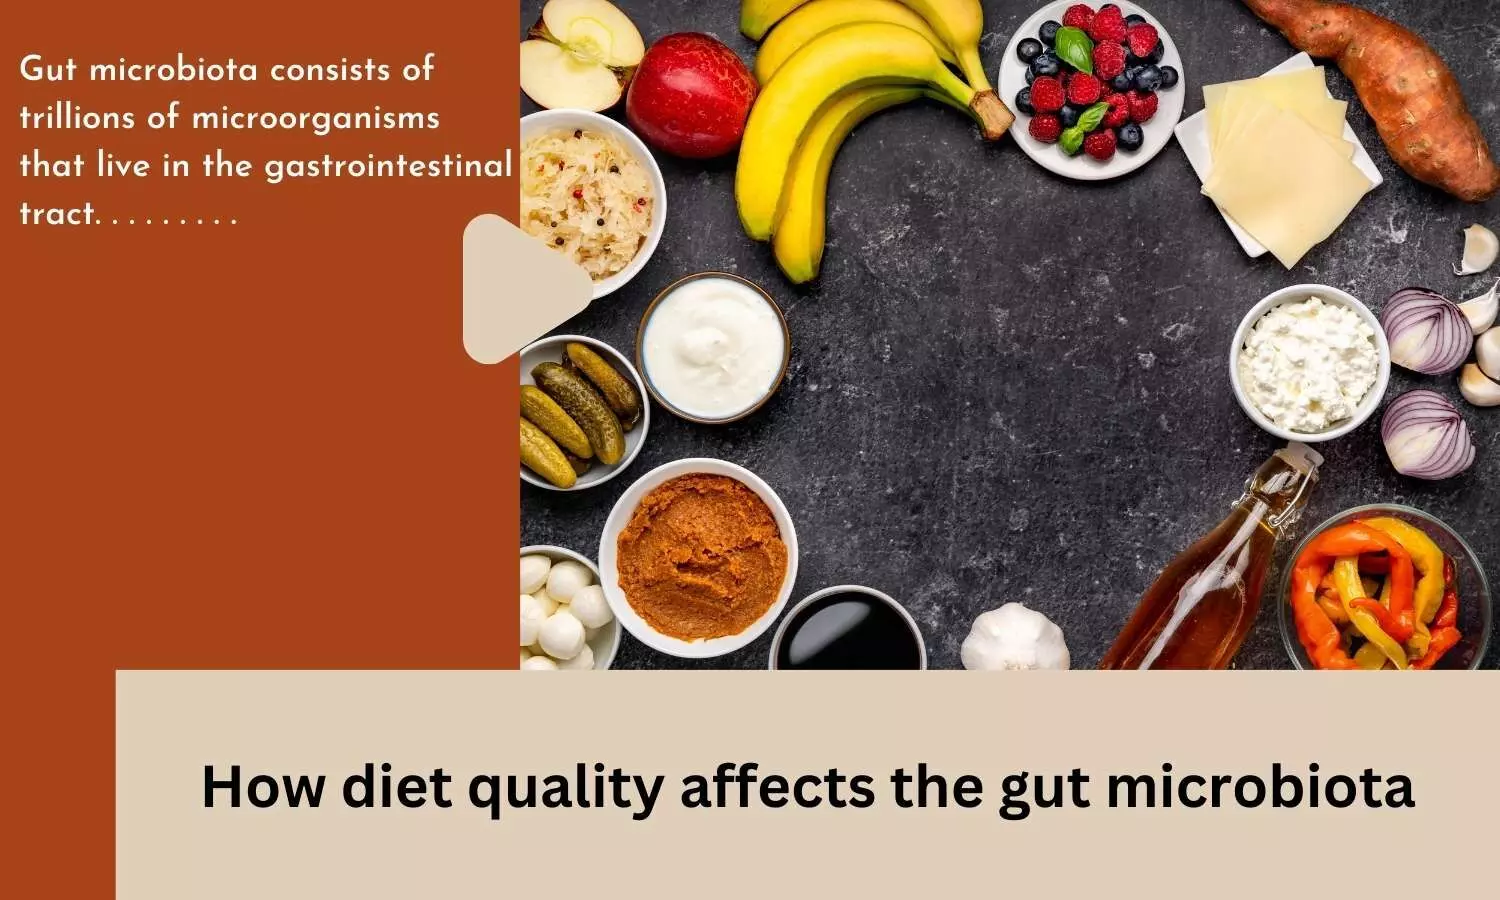 How diet quality affects the gut microbiota